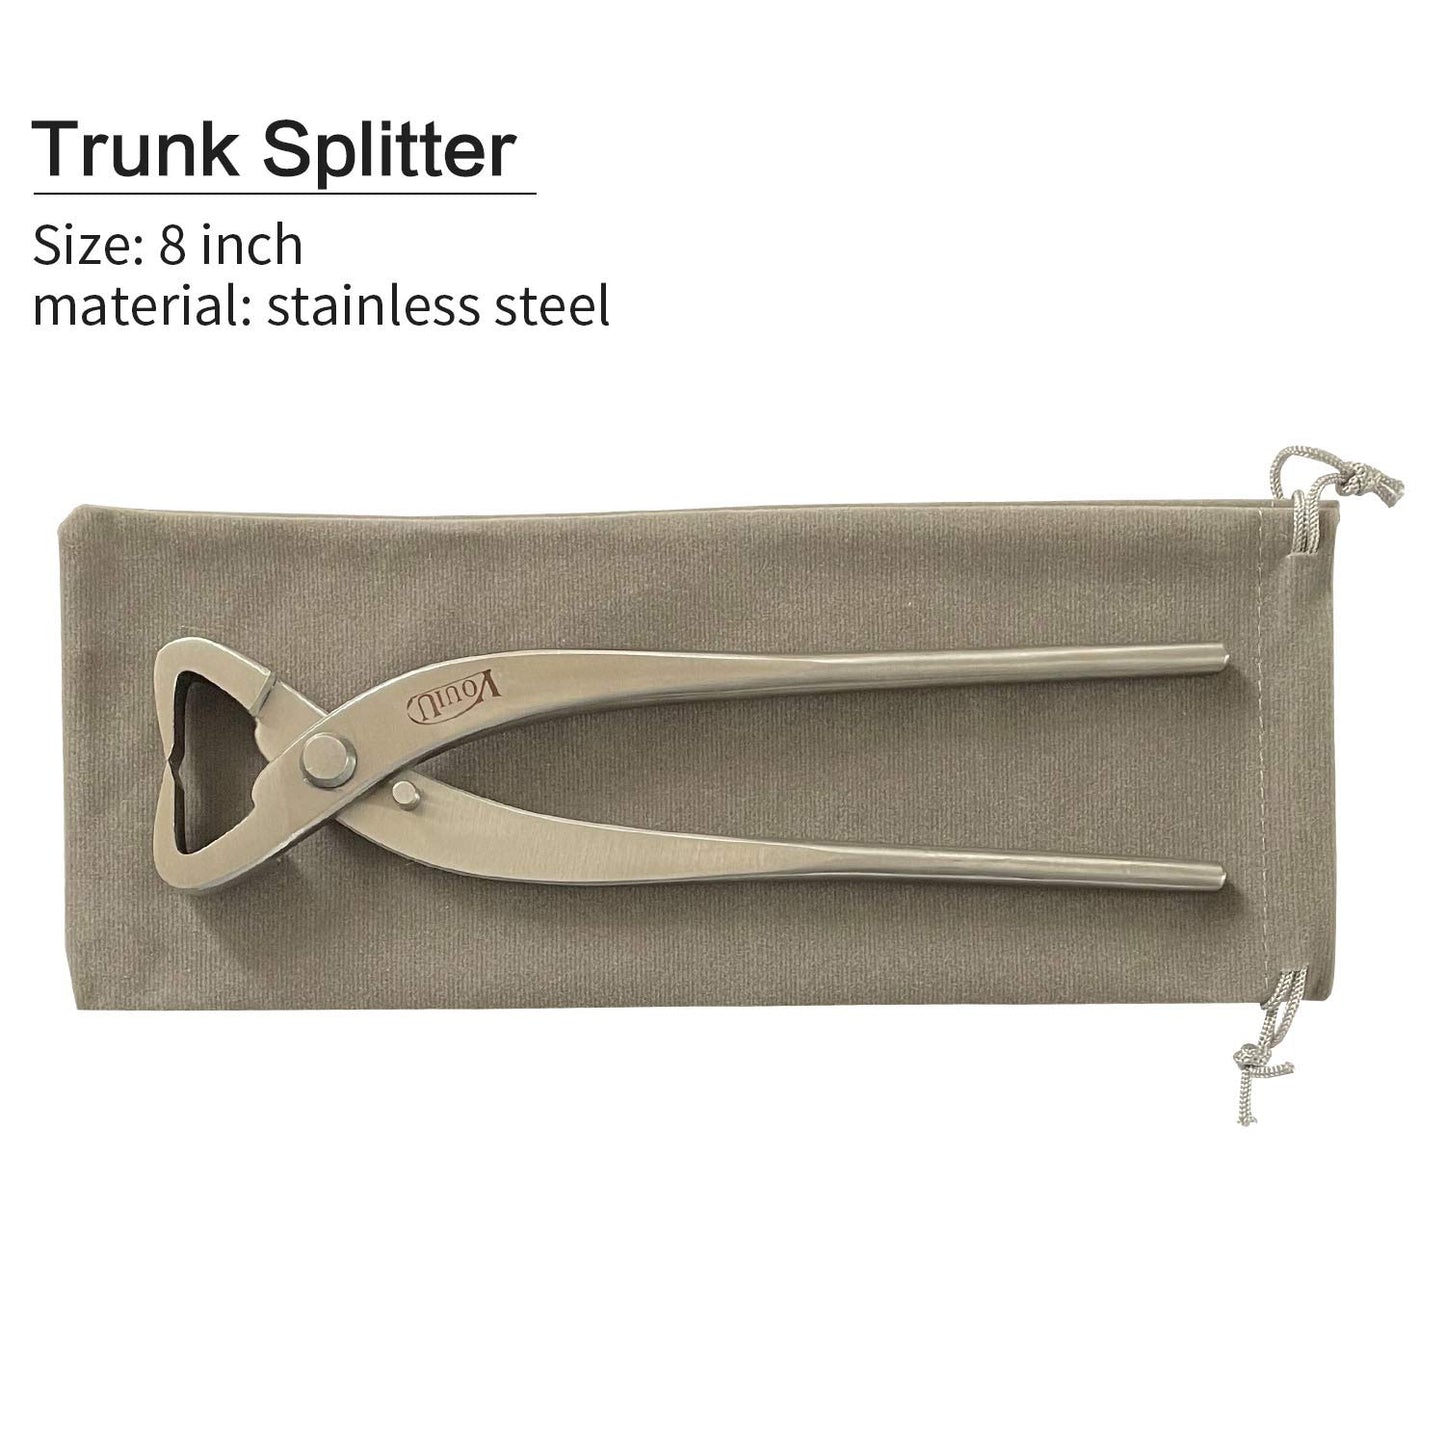 Bonsai Trunk Splitter - Quality Stainless Steel - Chinese Made